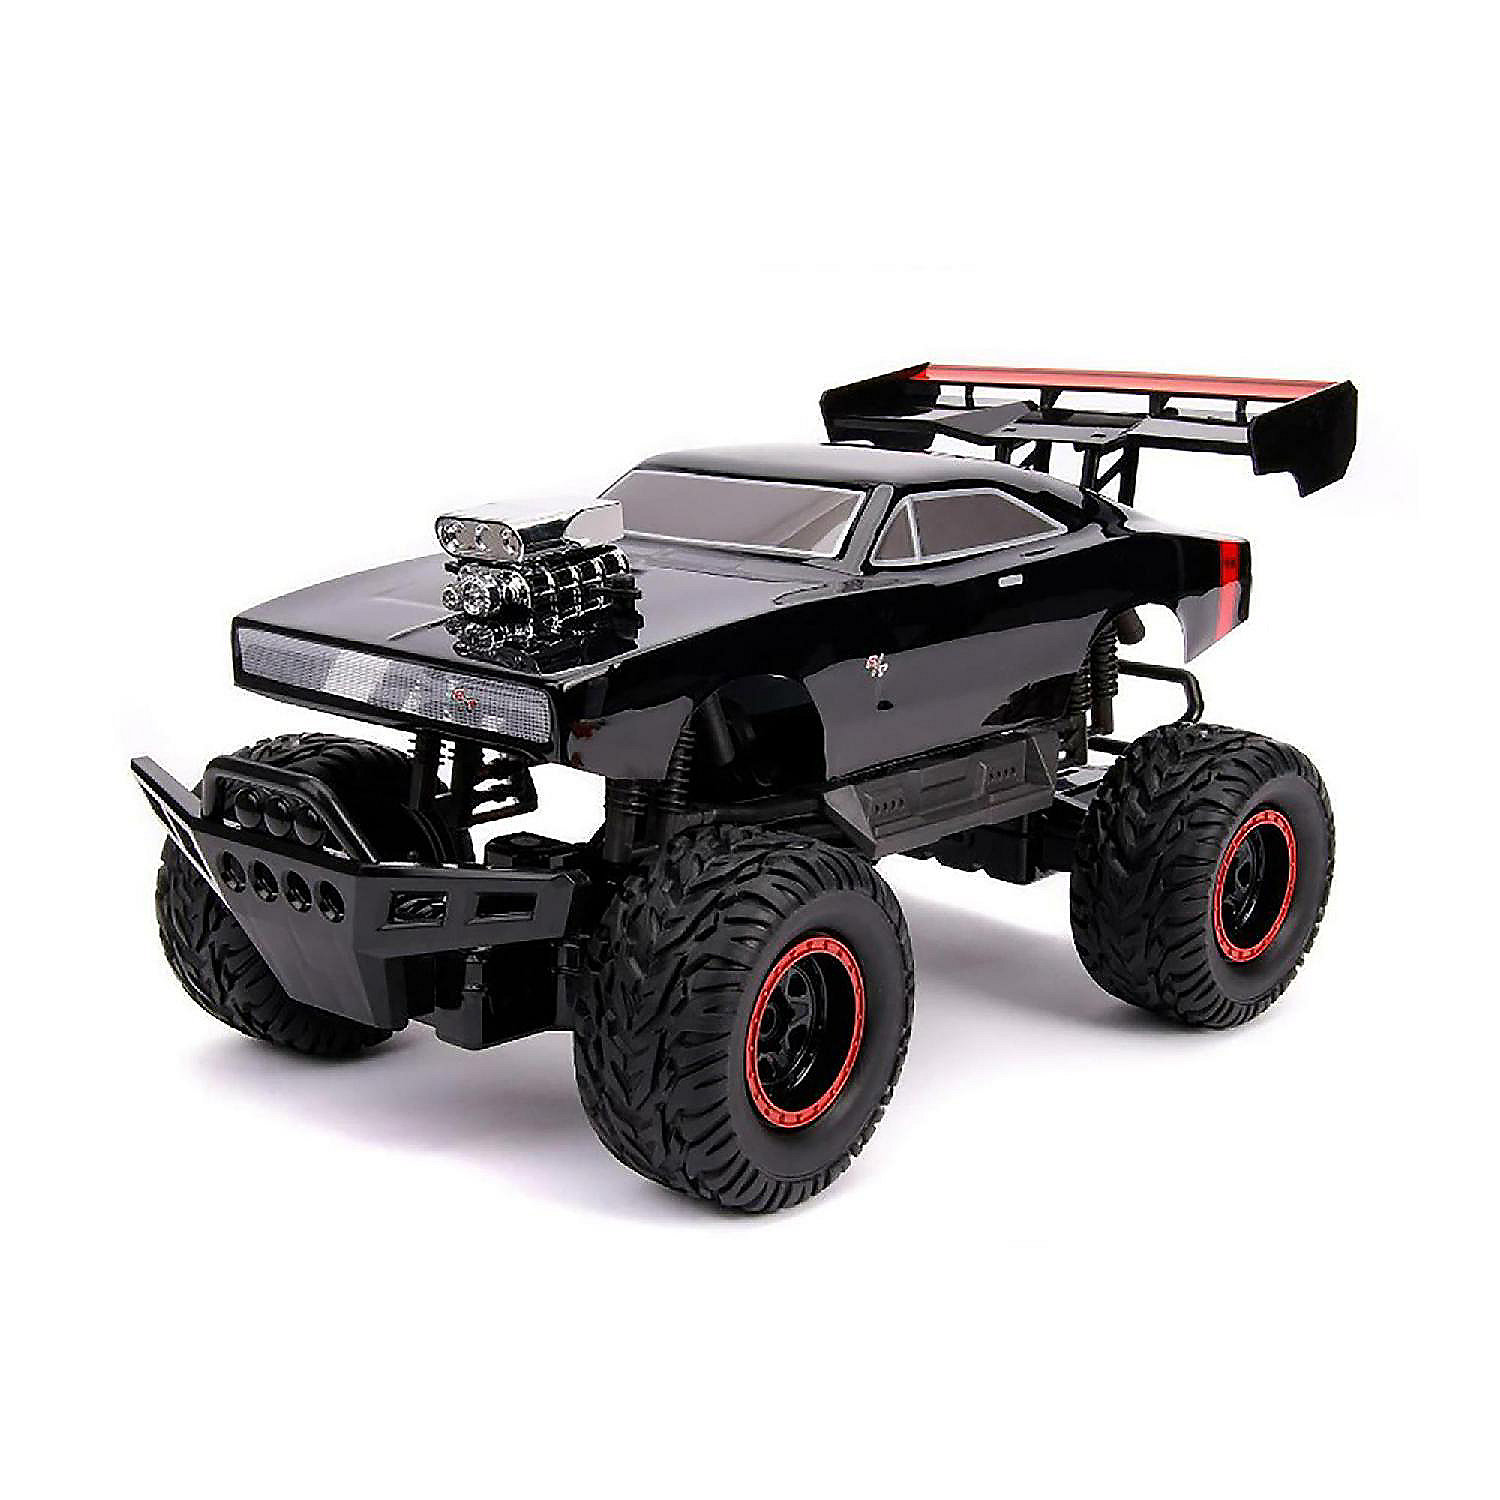 Fast and Furious 1:12 Remote Control Elite Off-Road Dodge Charger